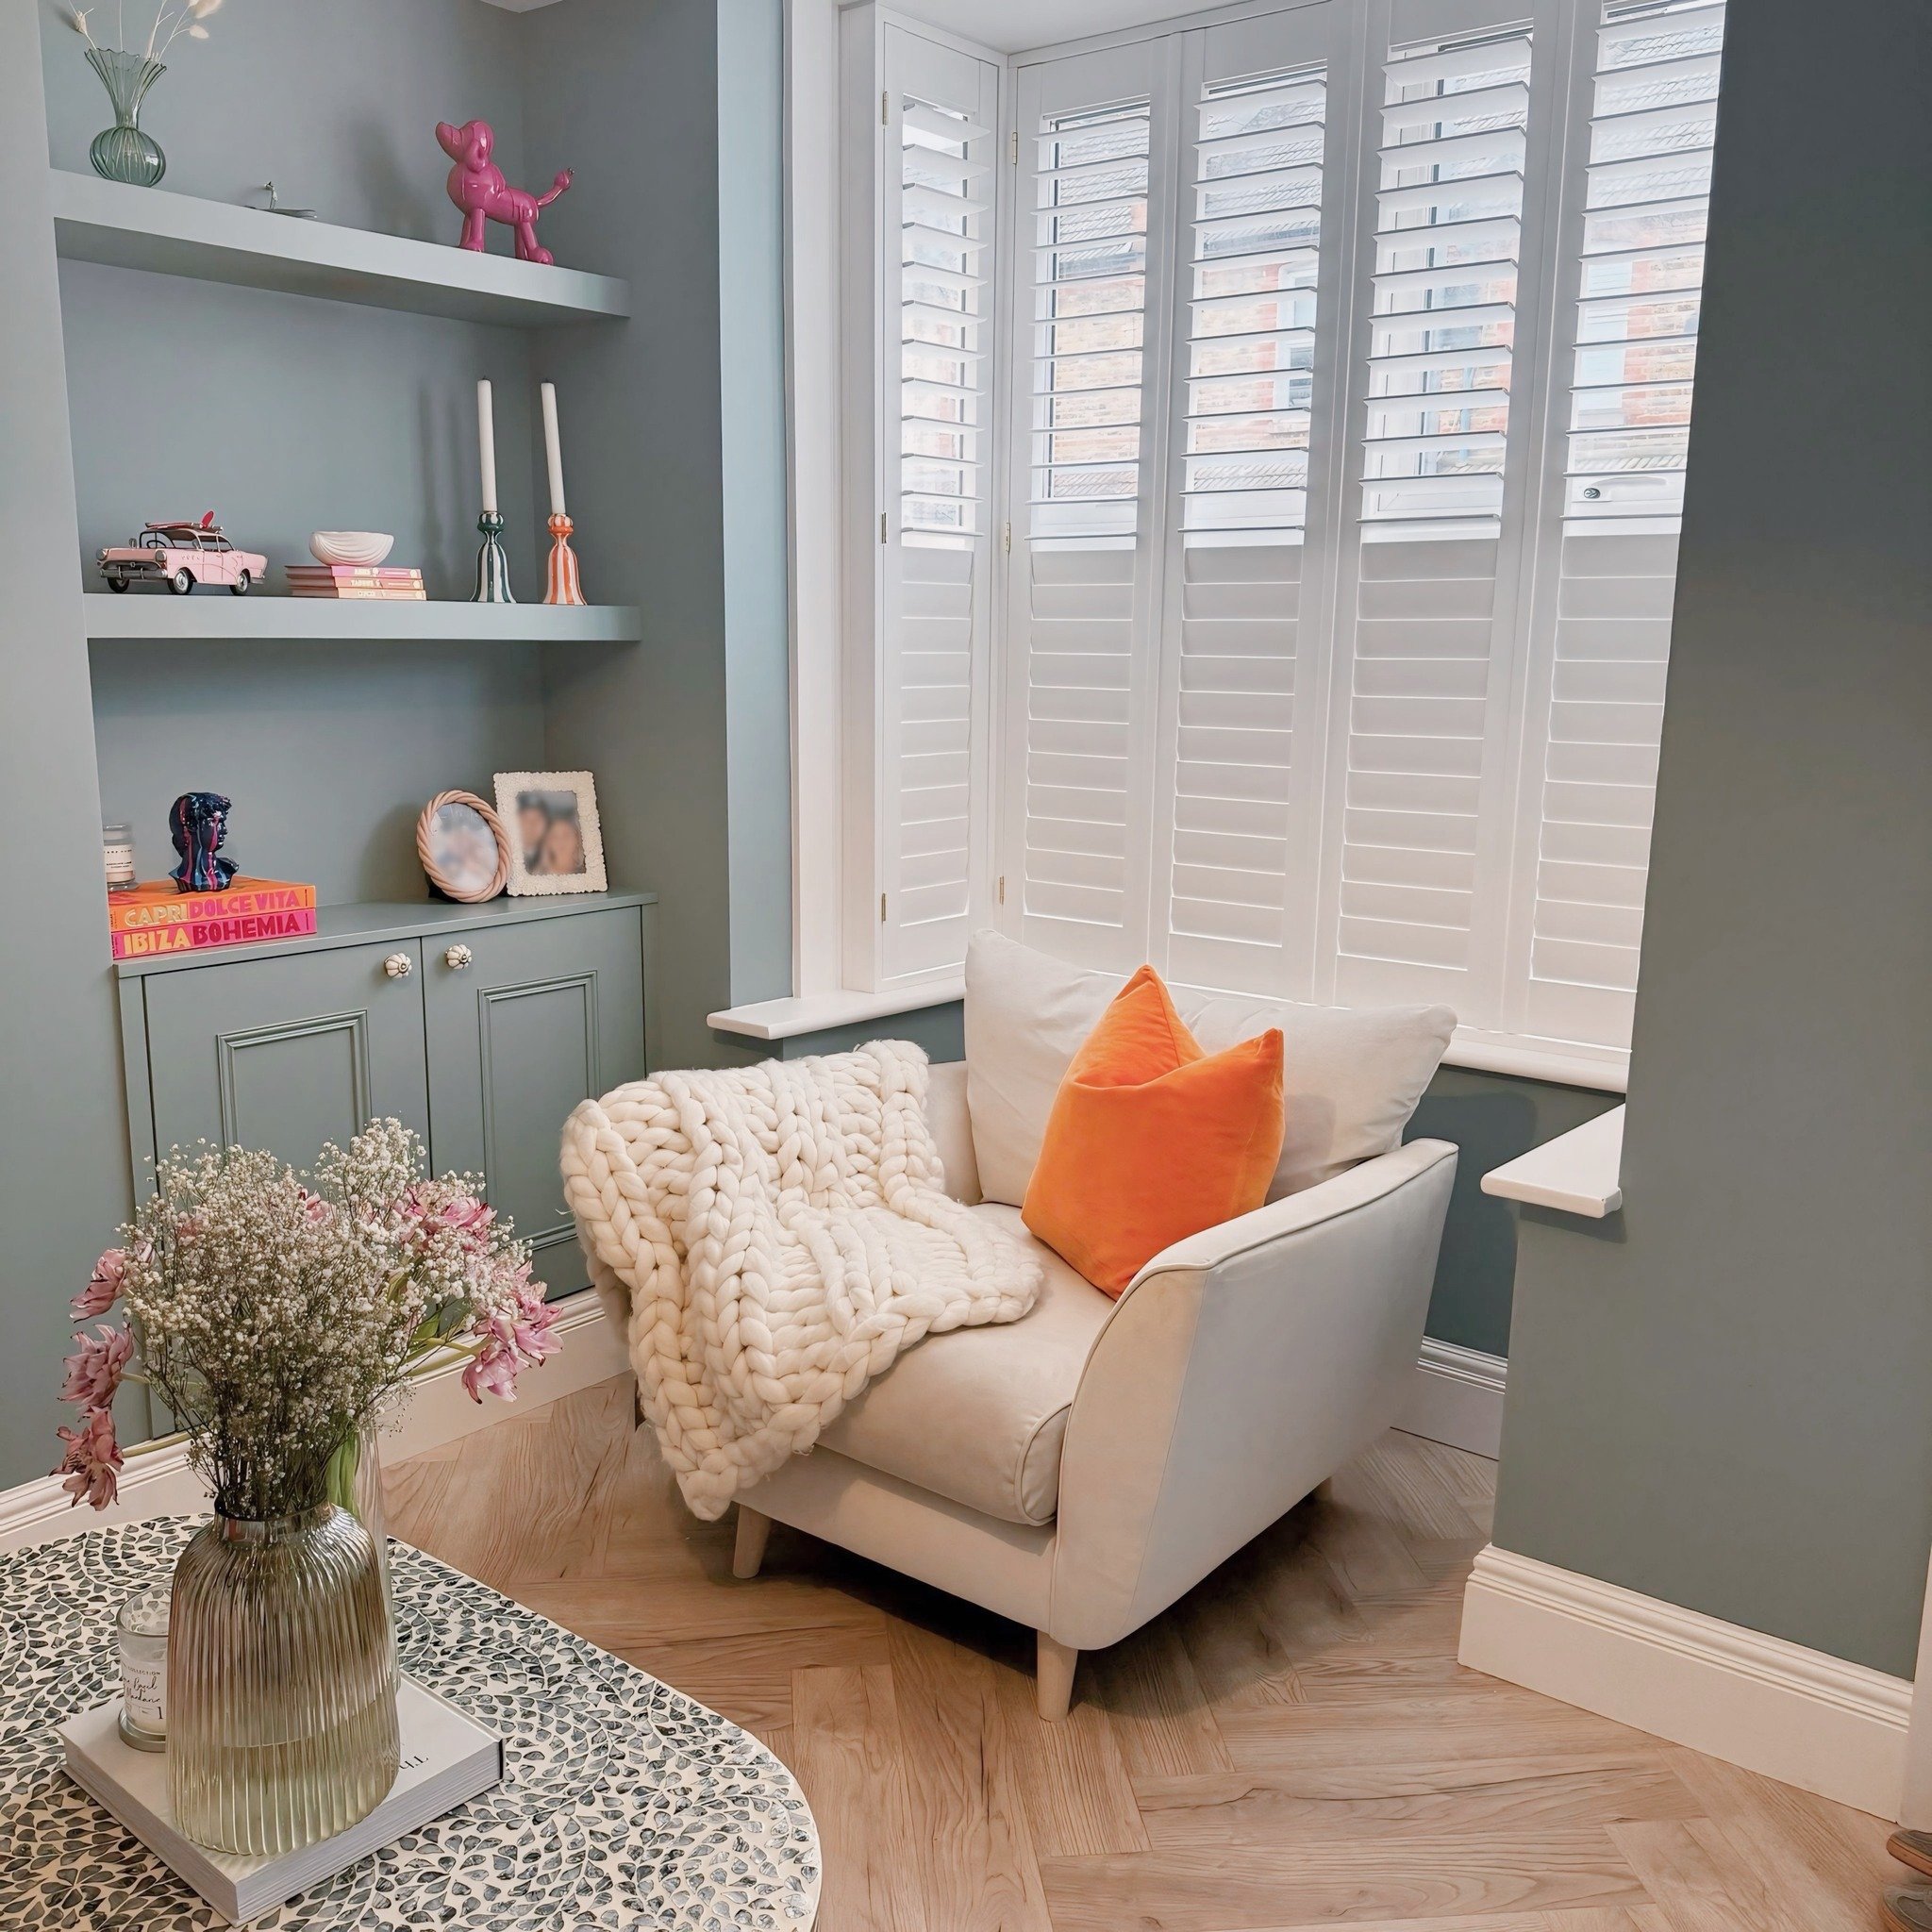 Transform Your Living Space with Our Full Height Shutters. This Customer Opted for Pure White Colourway with Our Stunning Gold Hinges! 🏡
 
These Elegant Window Dressings not Only Add a Touch of Luxury to Your Interiors but Also Offer Privacy, Light 